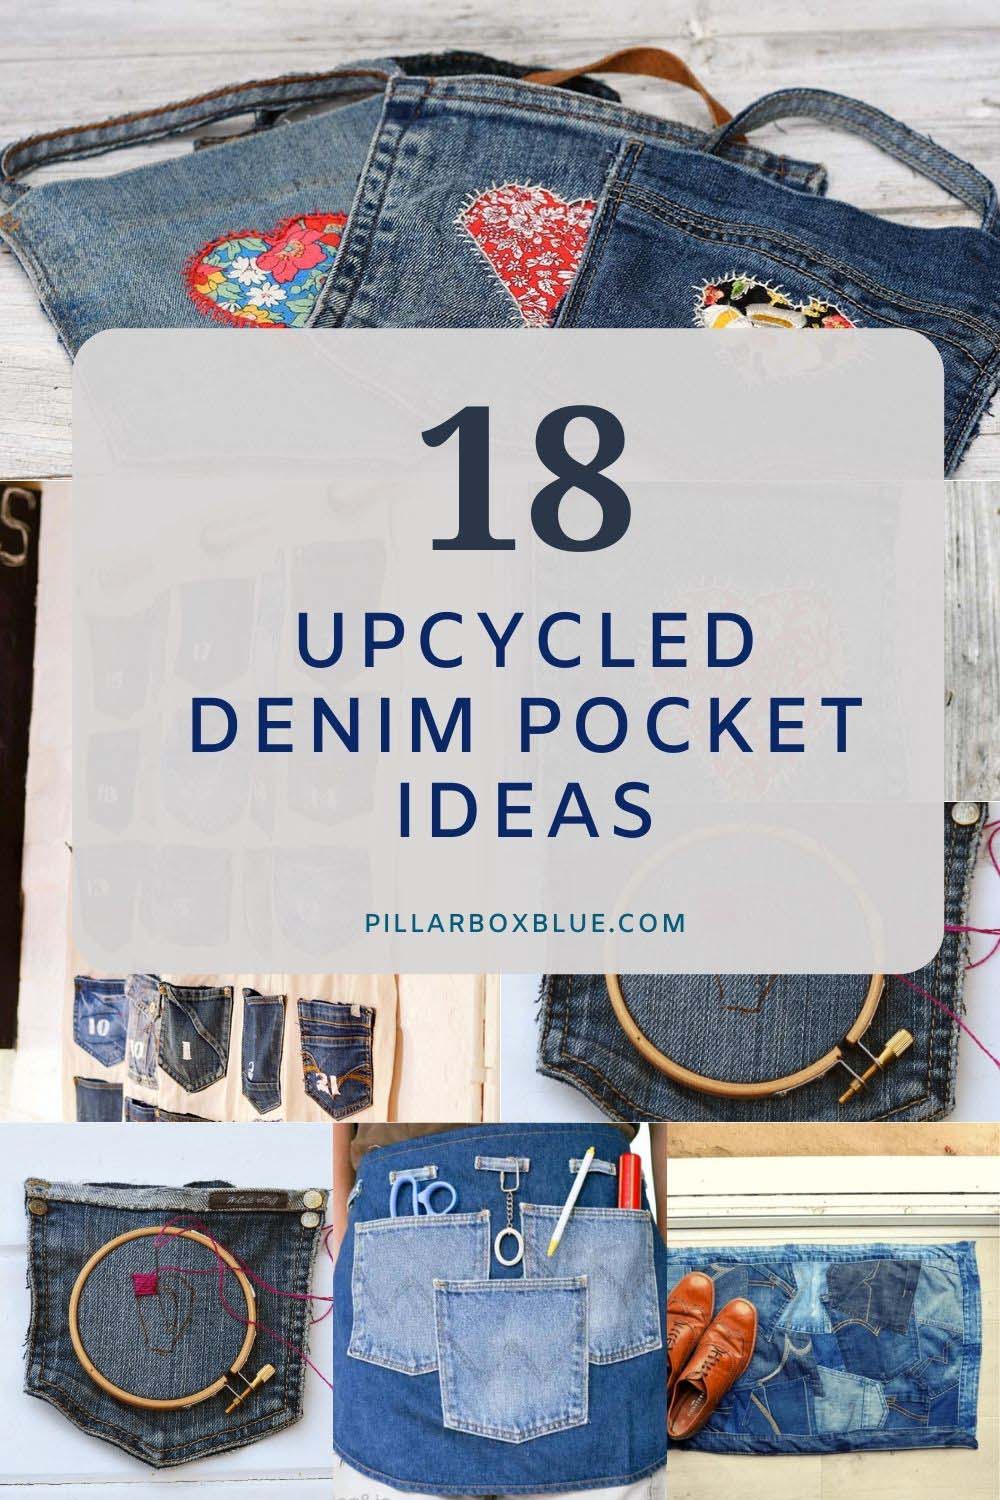 What Can You Do With Old Jeans Pockets? - Pillar Box Blue